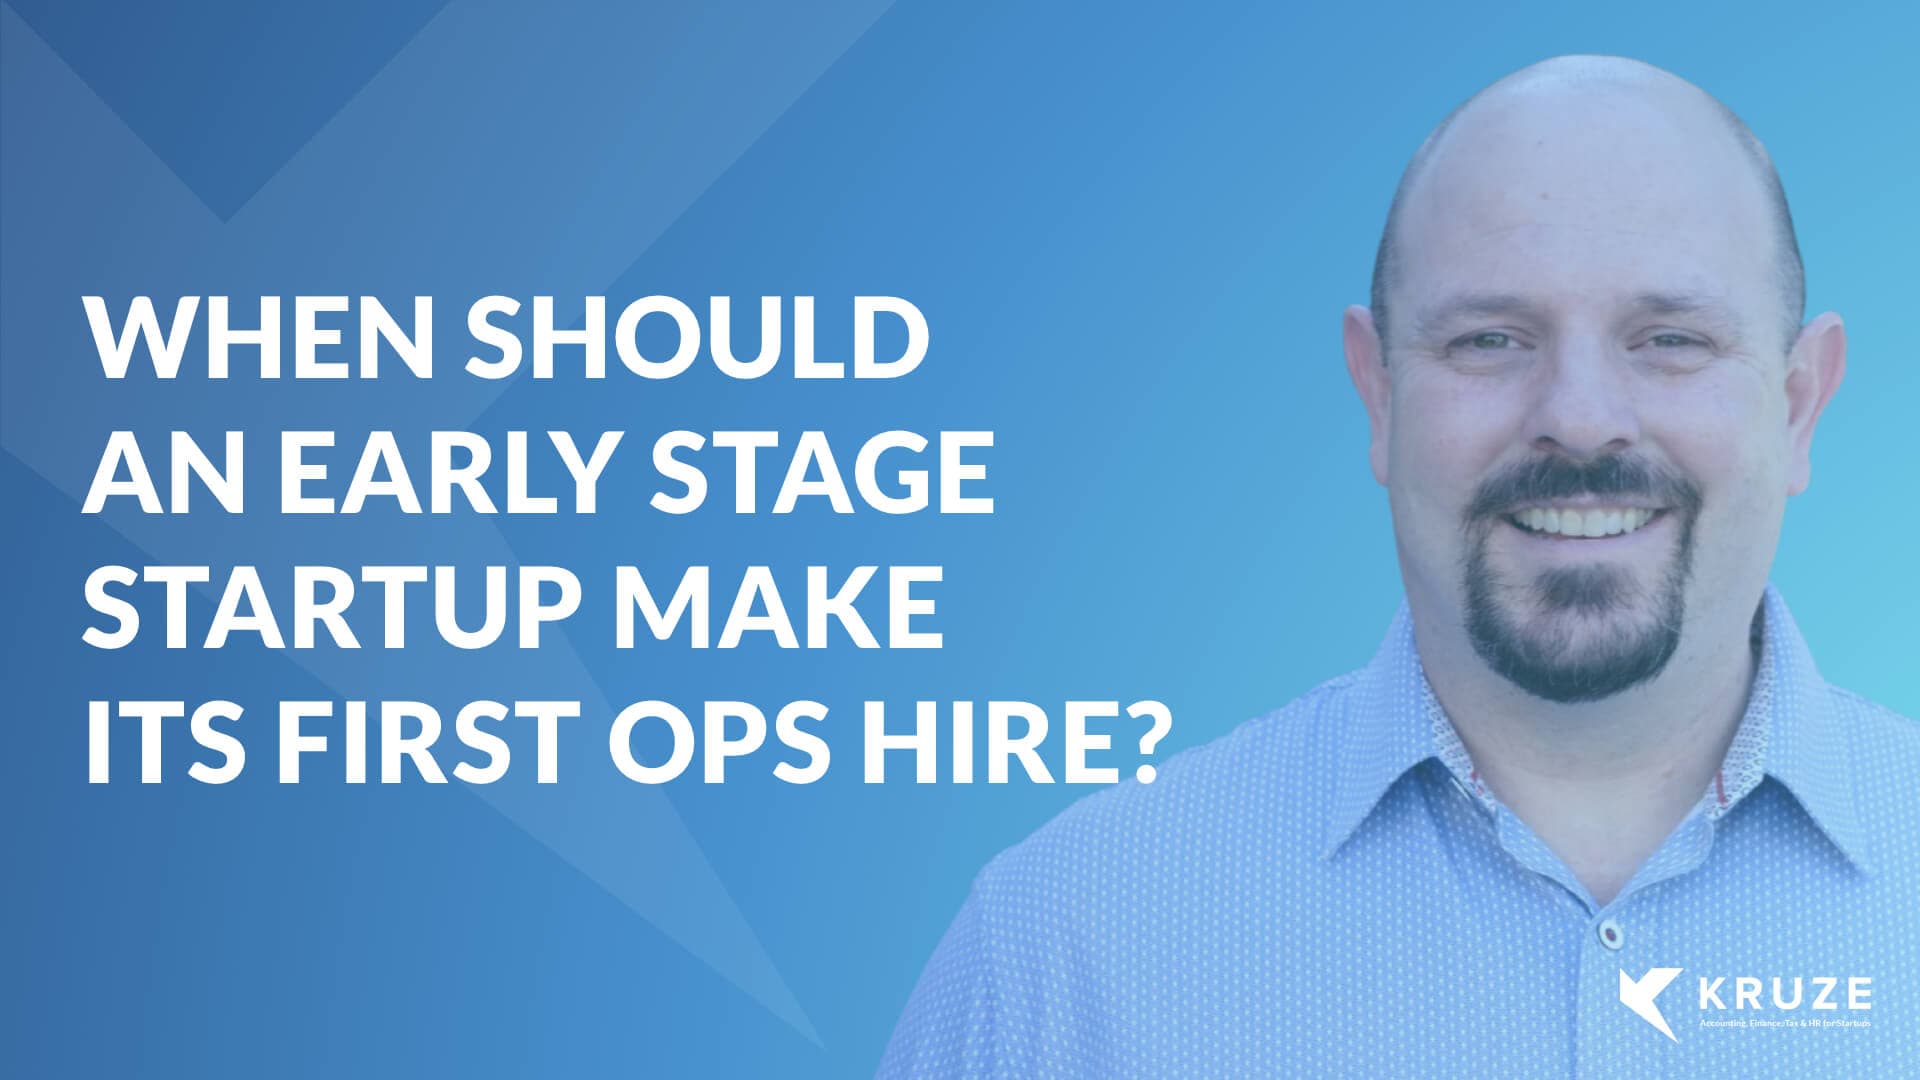 When should a startup make its first ops hire